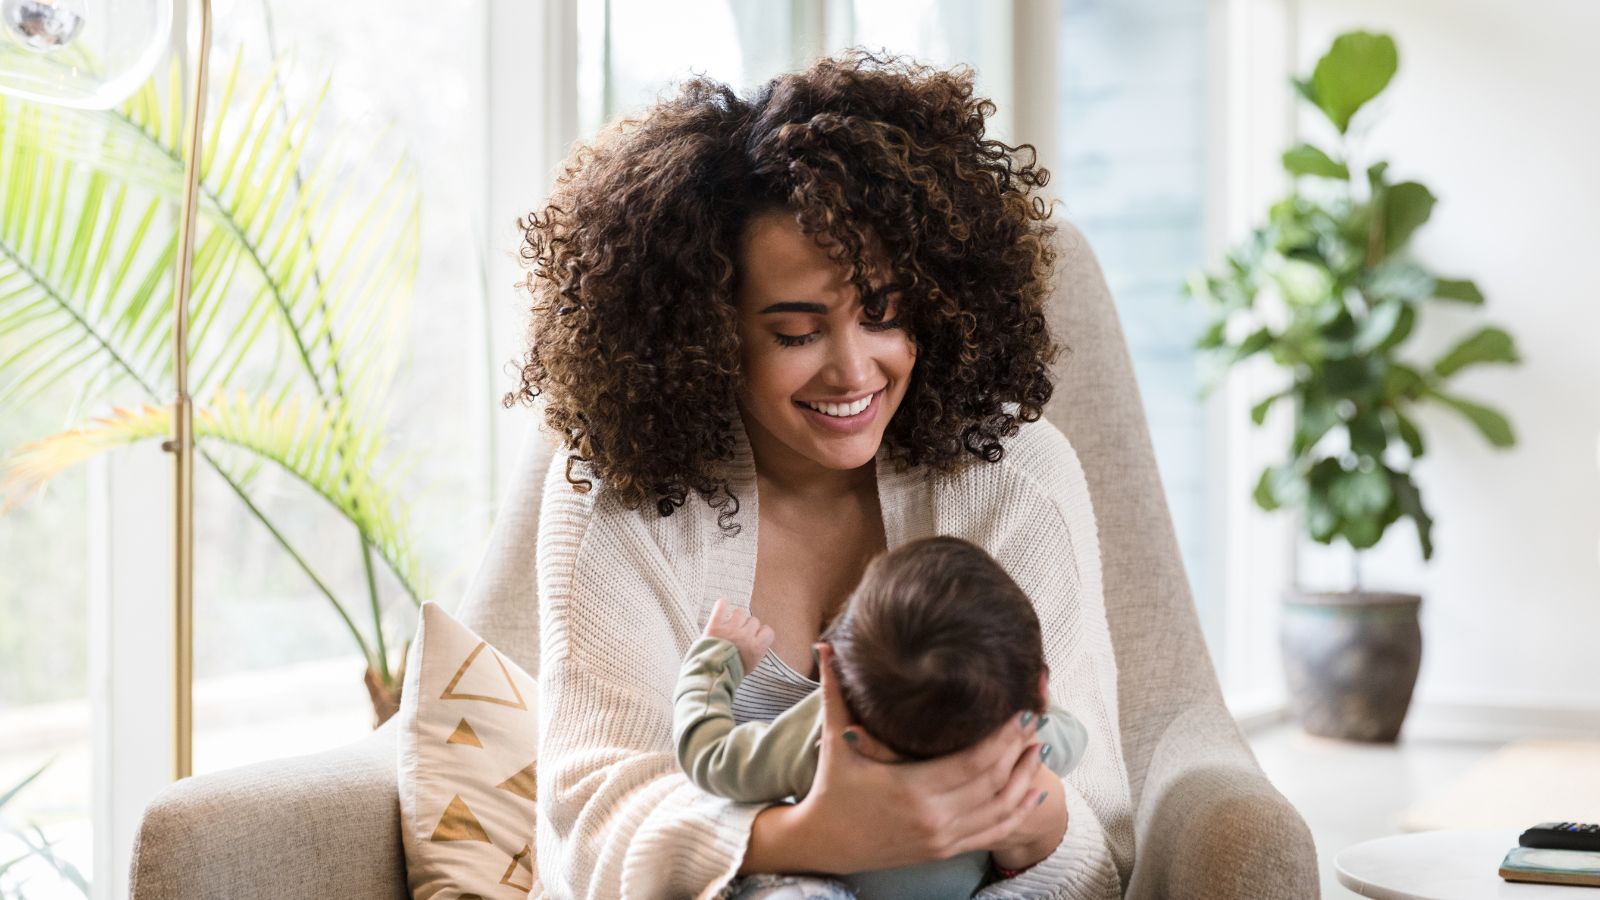 Where can new, breastfeeding Moms seek support?